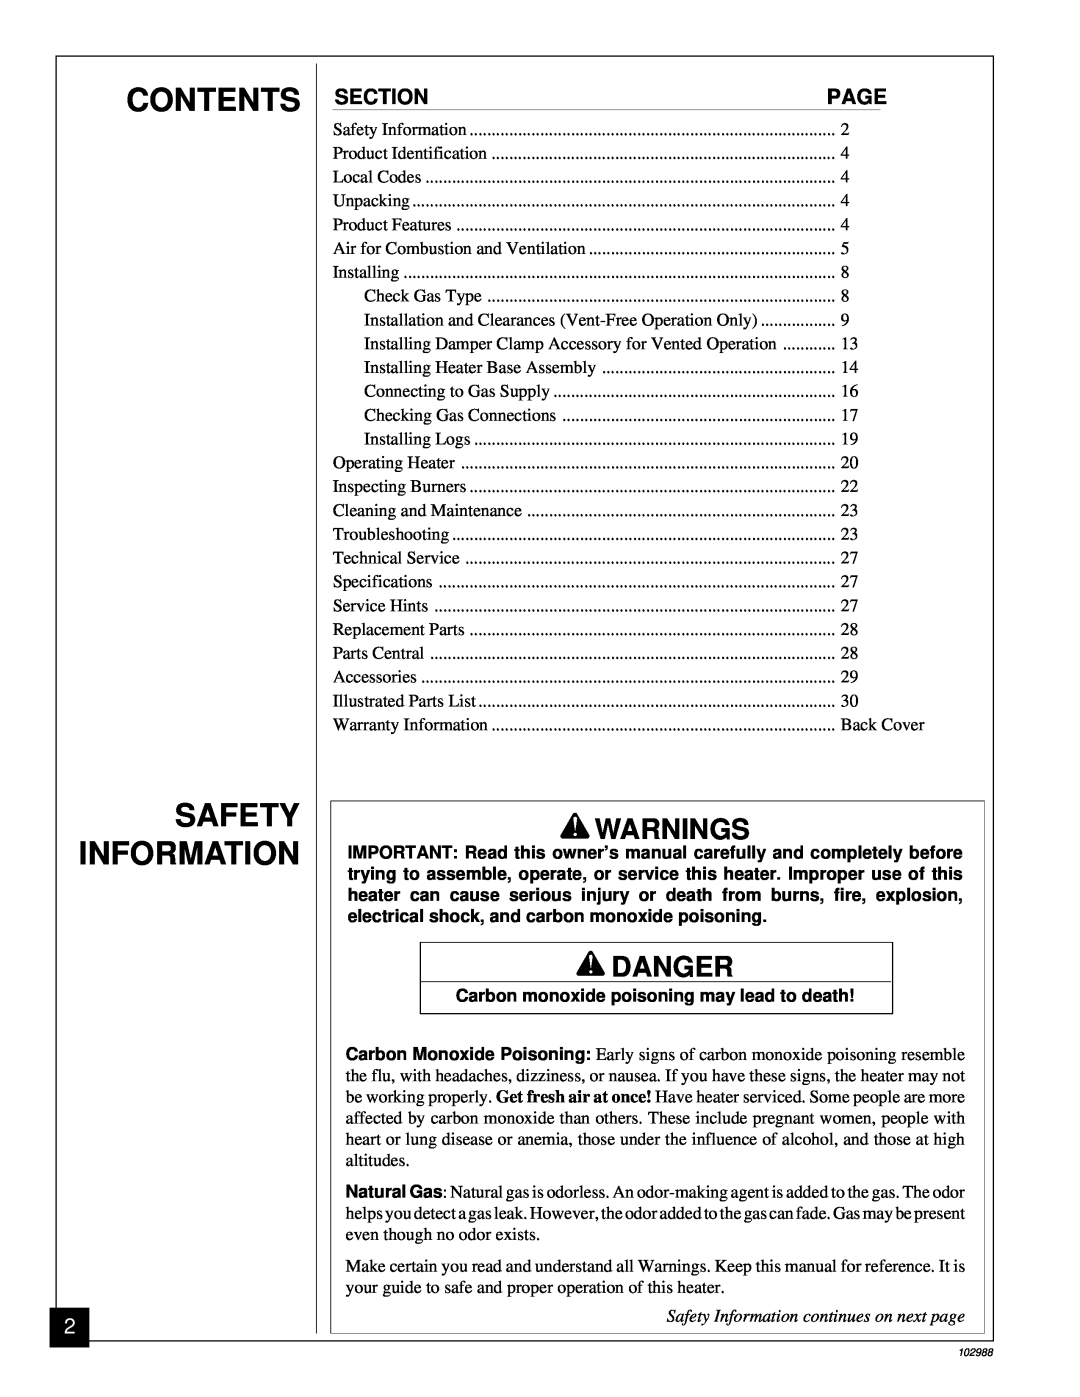 Desa CGS2718N Contents Safety Information, Warnings, Danger, Carbon monoxide poisoning may lead to death 